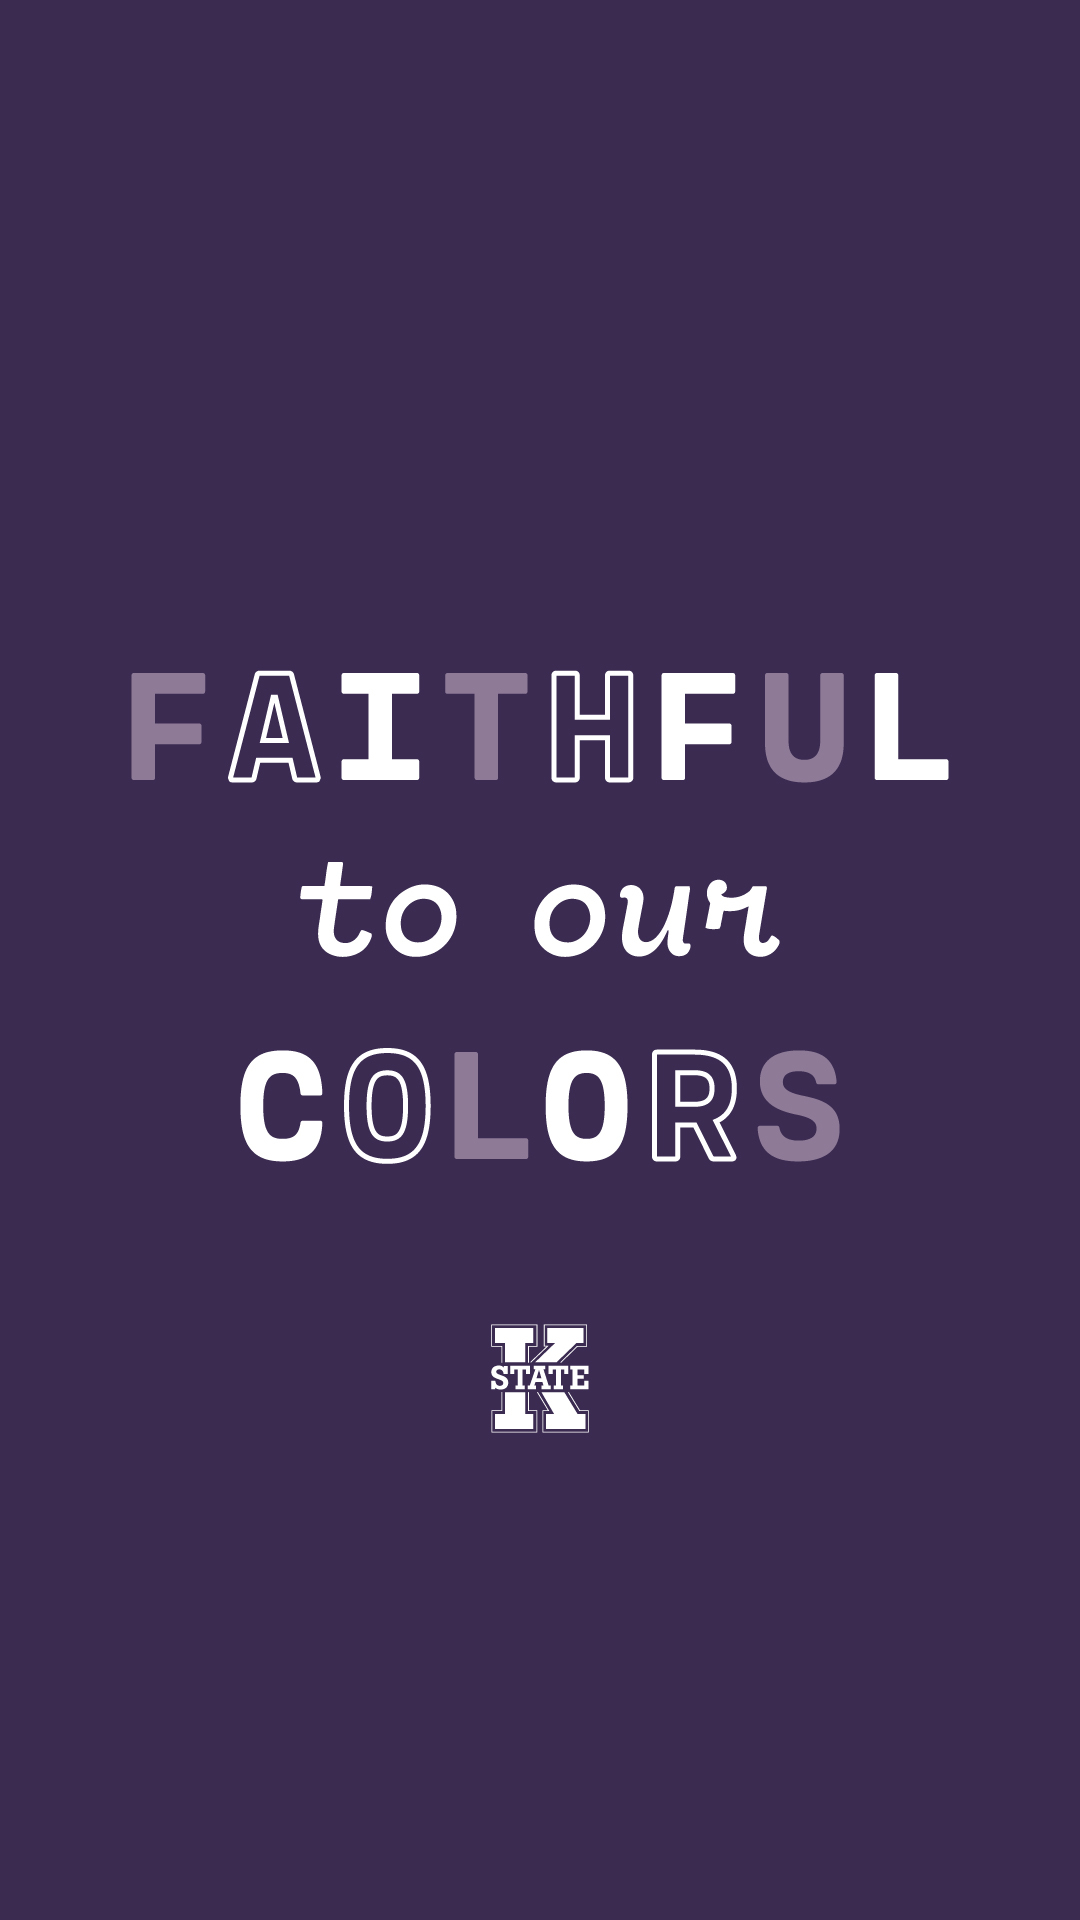 Faithful to our colors iPhone background